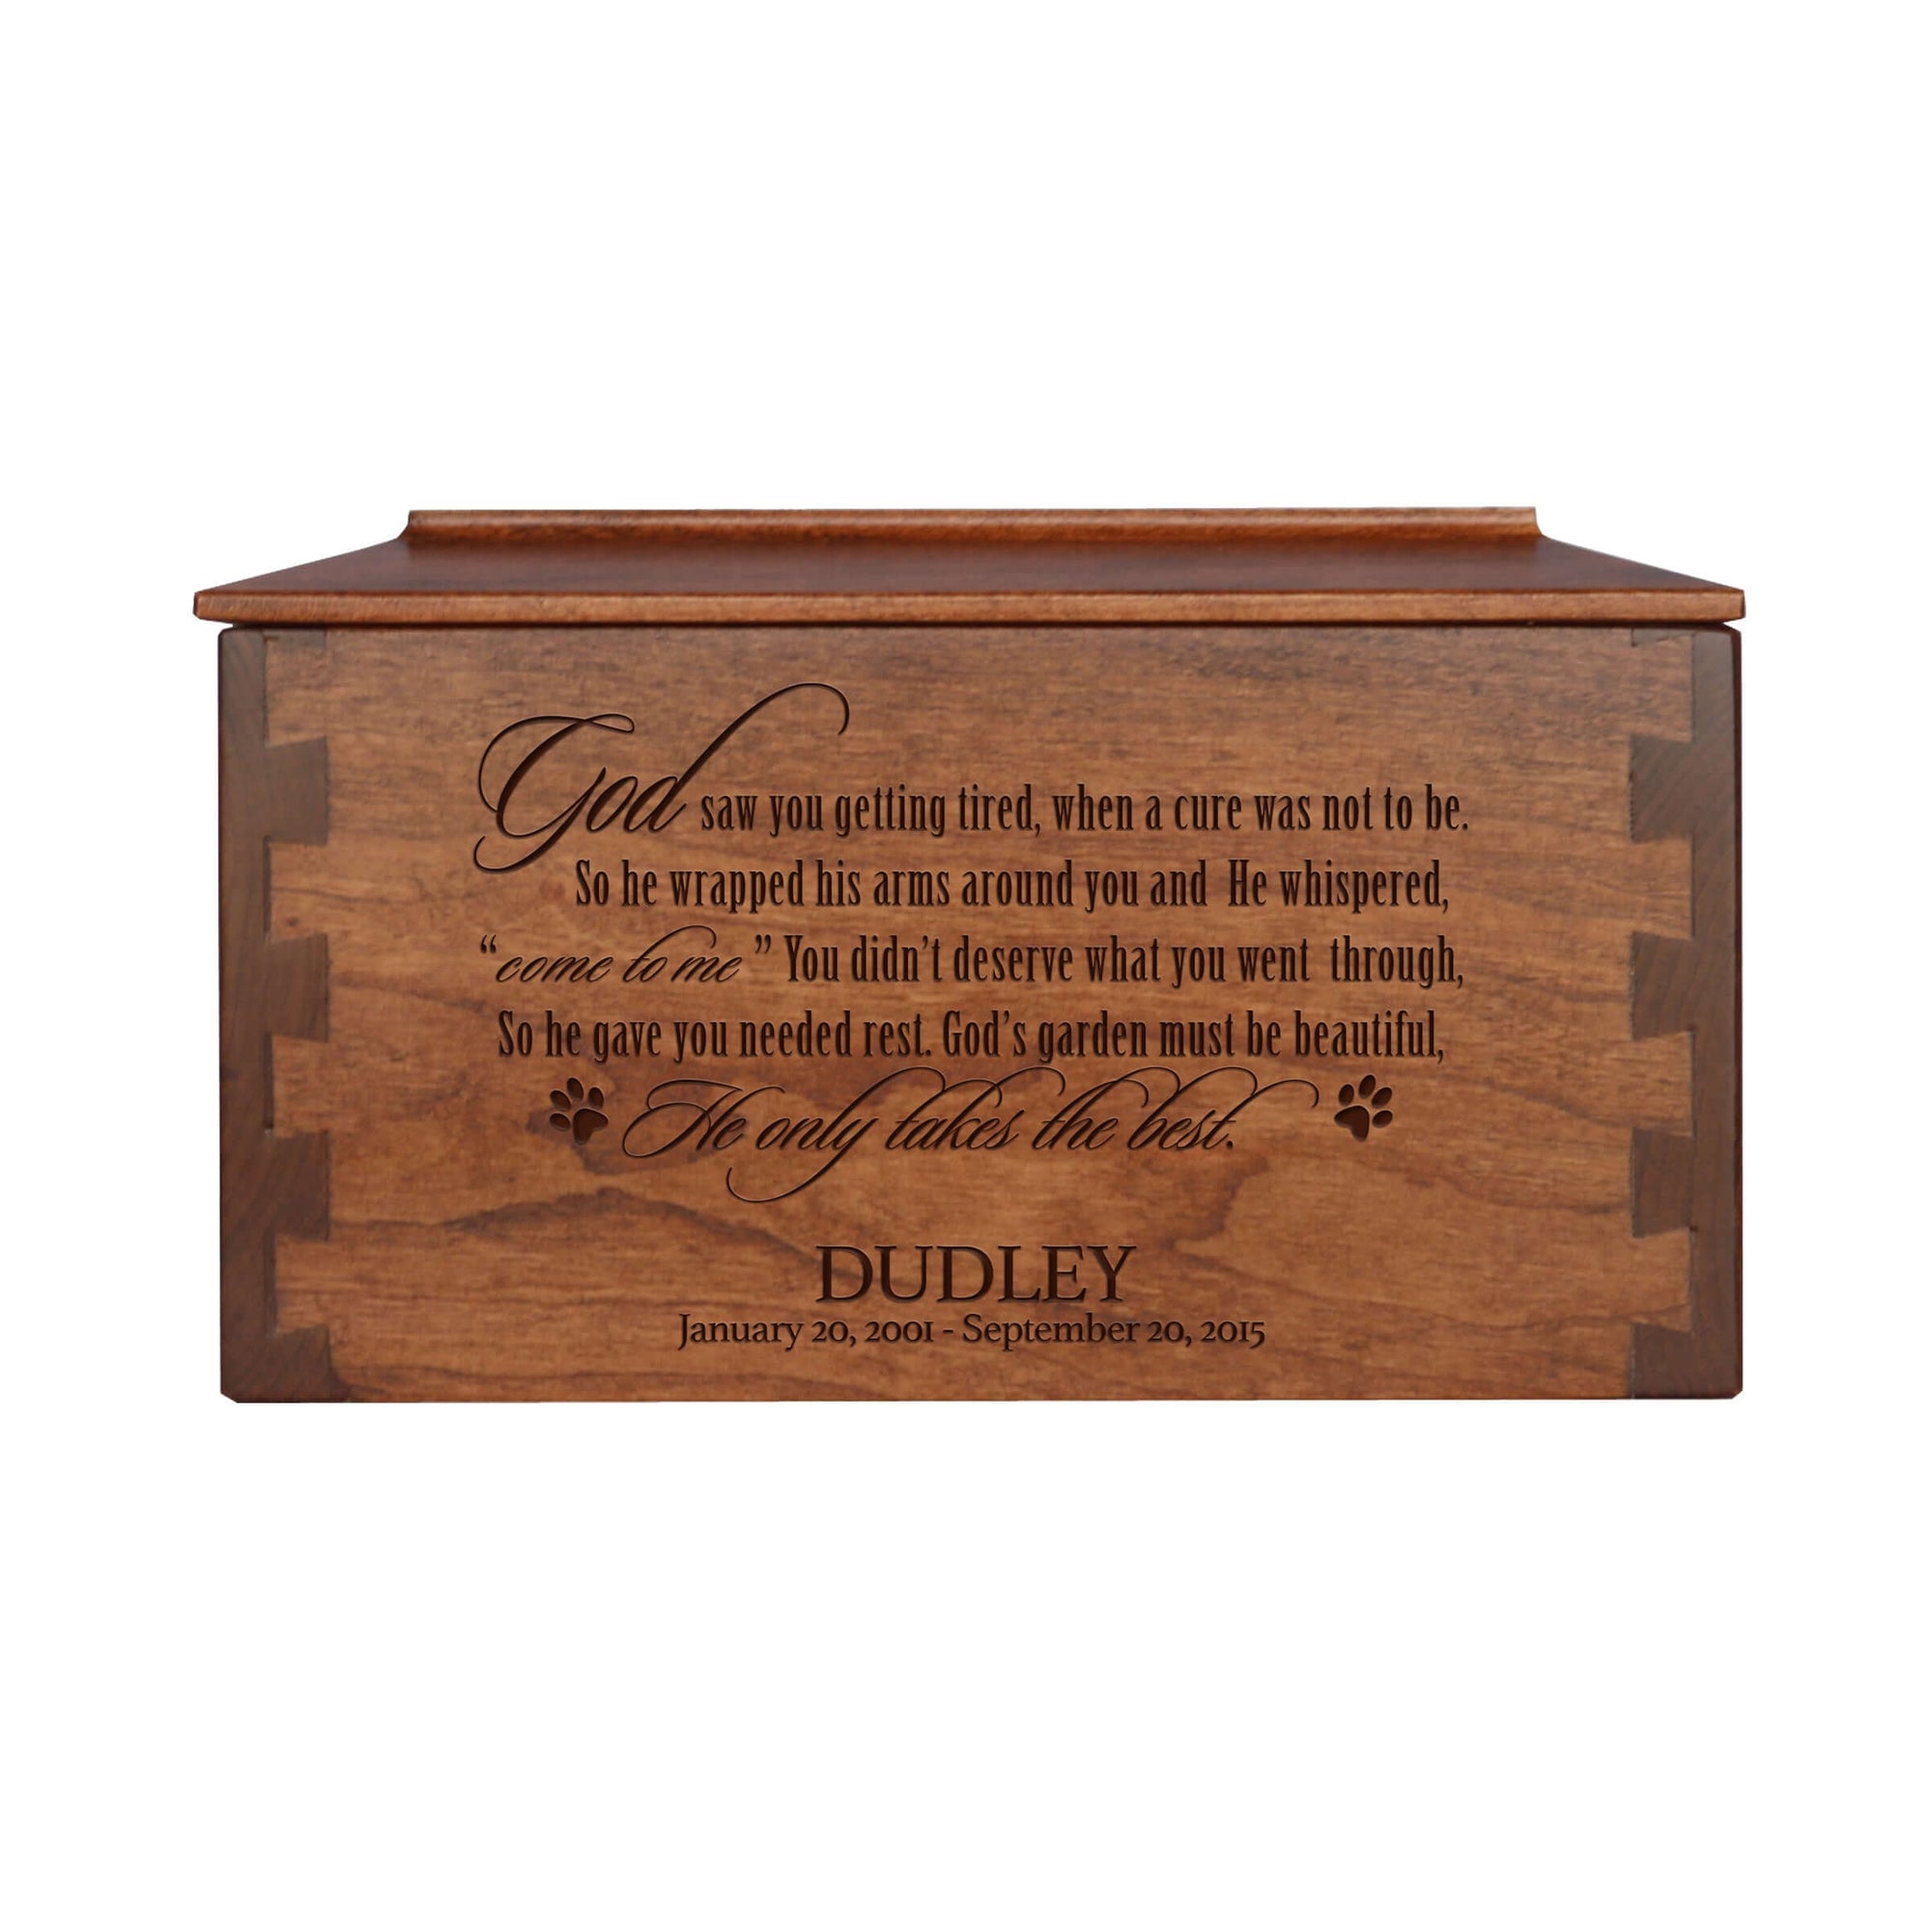 Pet Memorial Dovetail Cremation Urn Box for Dog or Cat - God Saw You Getting Tired